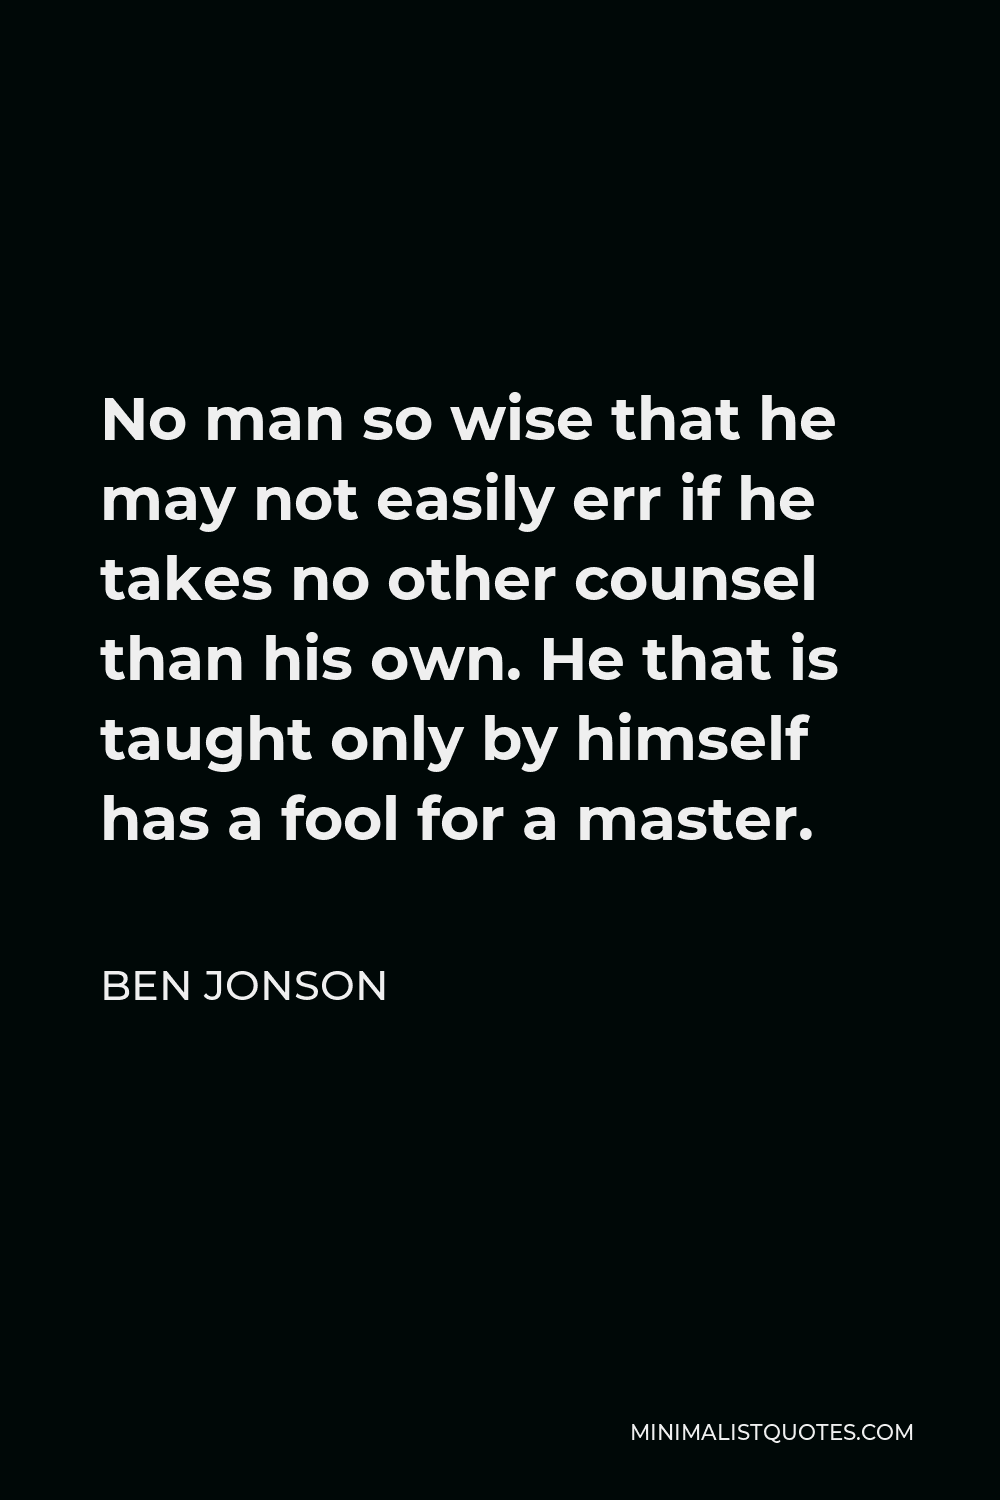 Ben Jonson Quote - No man so wise that he may not easily err if he takes no other counsel than his own. He that is taught only by himself has a fool for a master.